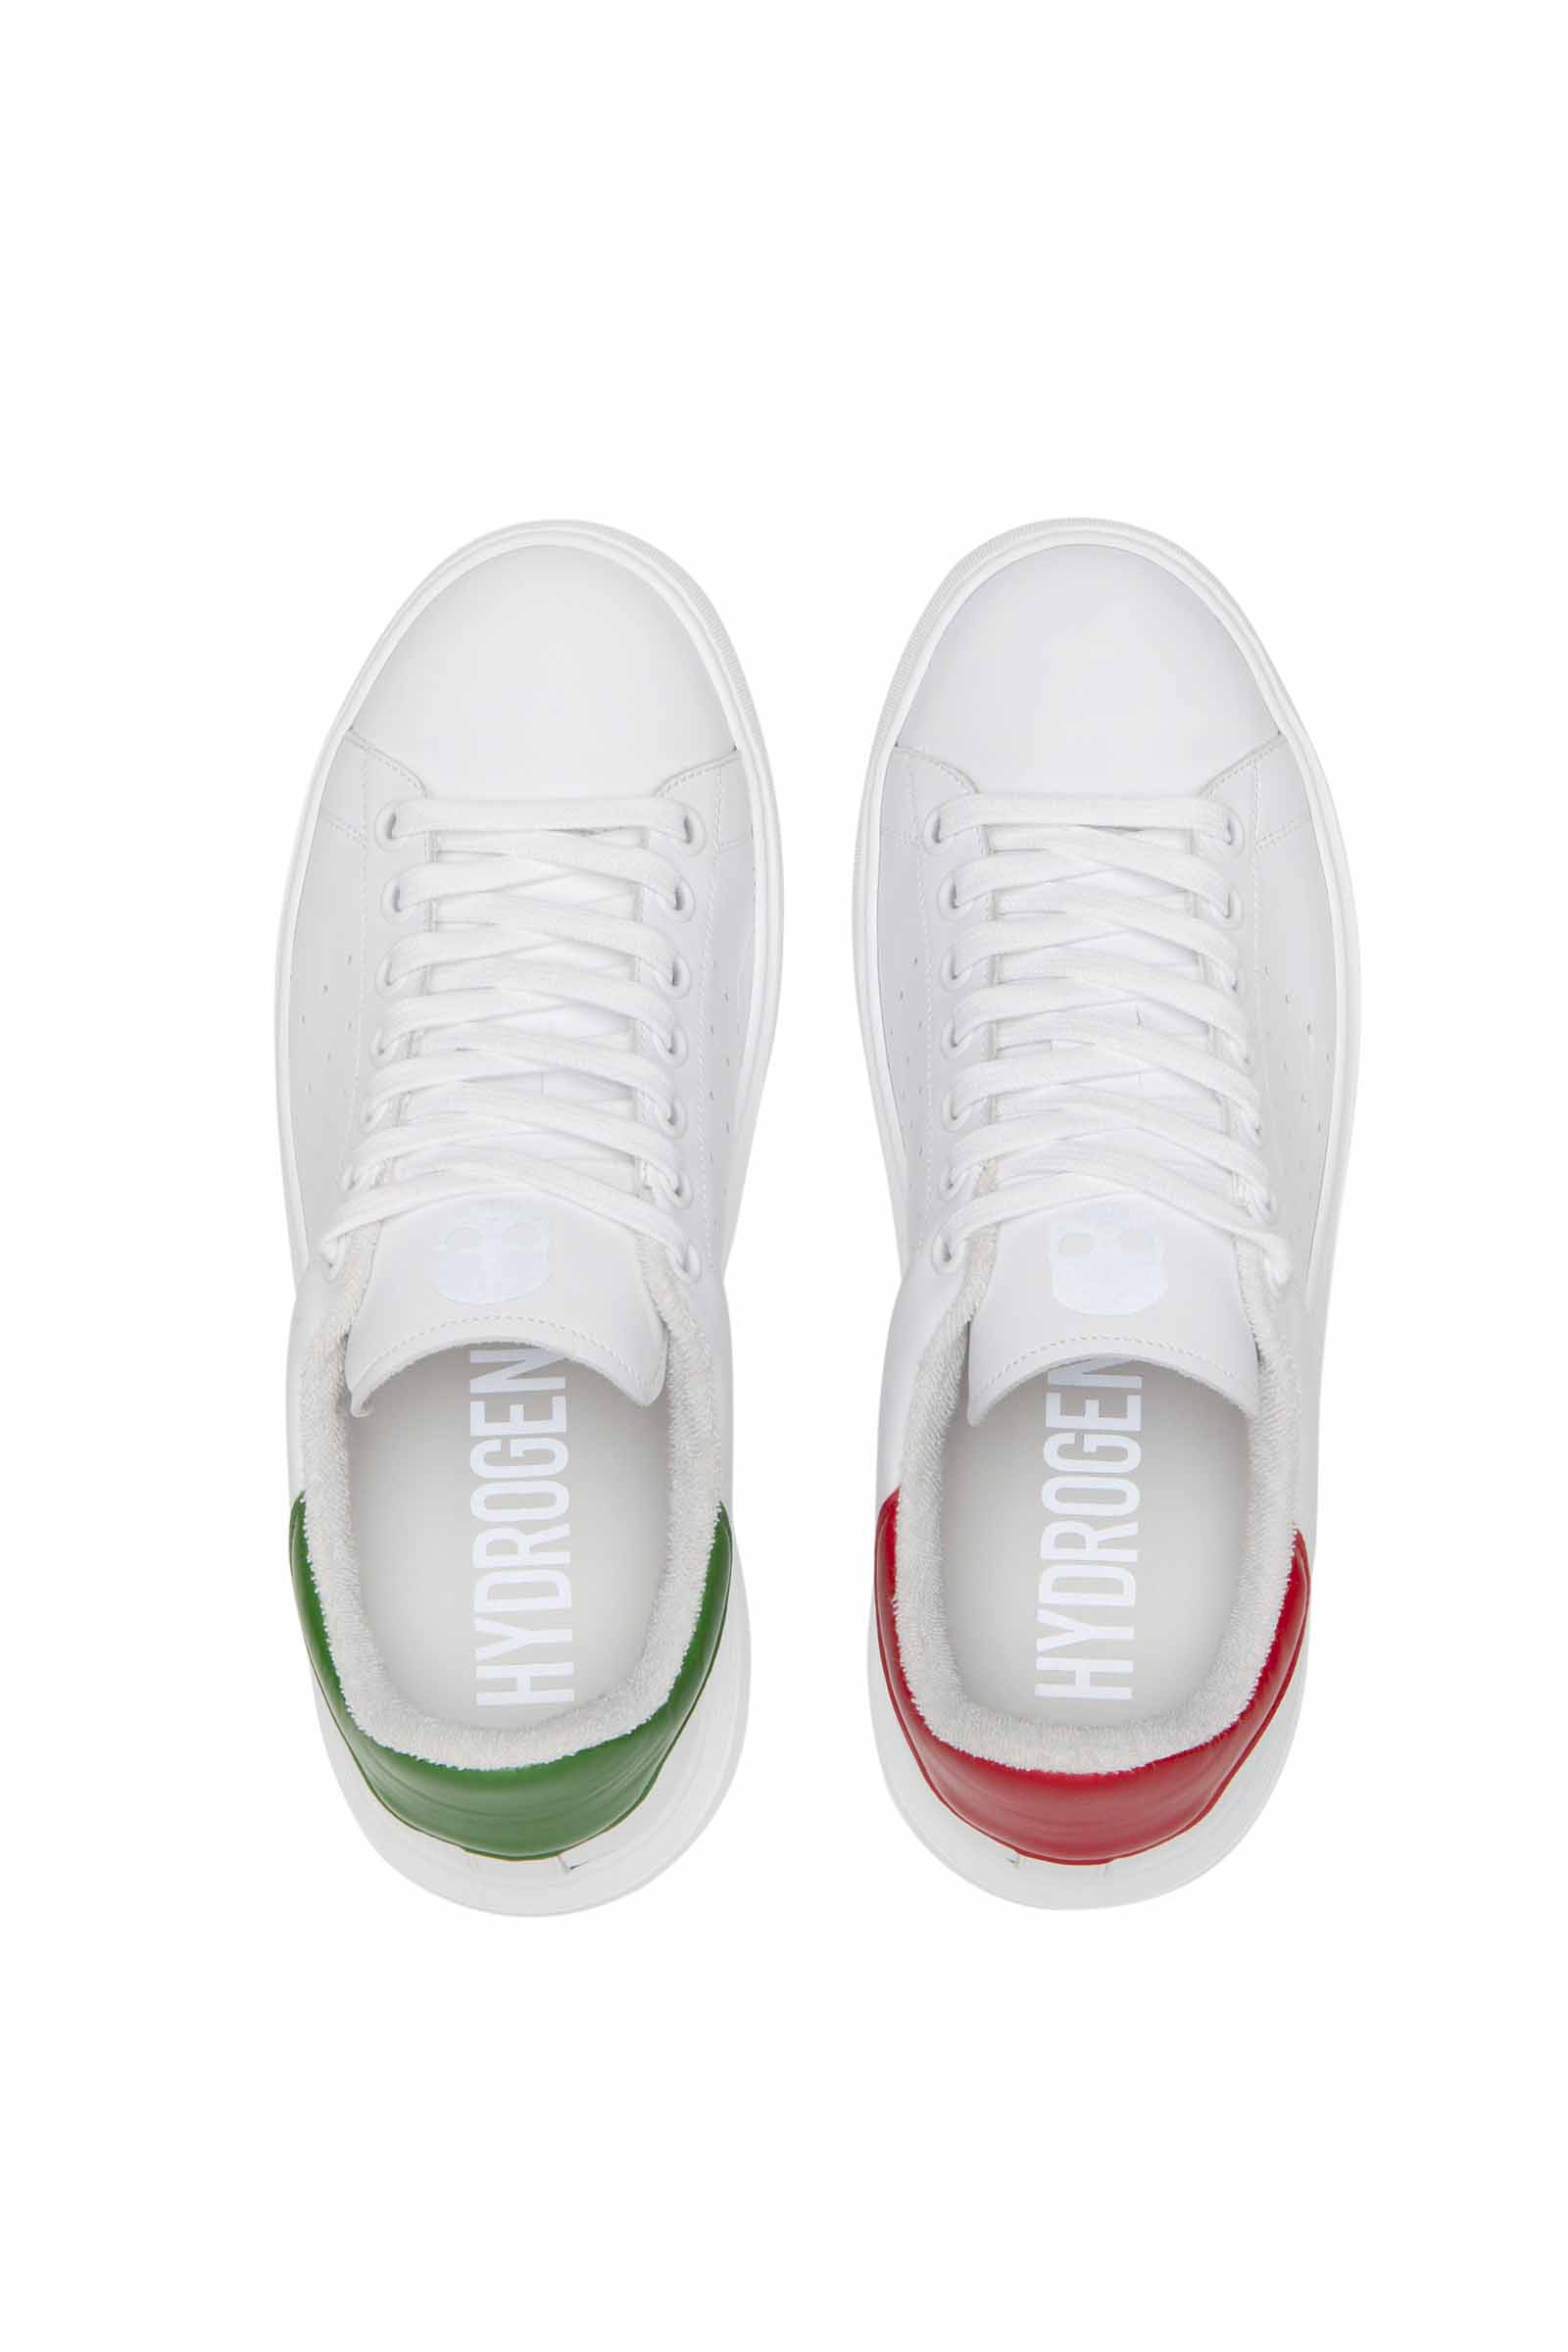 SNEAKERS ITALY LIMITED EDITION - Outlet Hydrogen - Luxury Sportwear